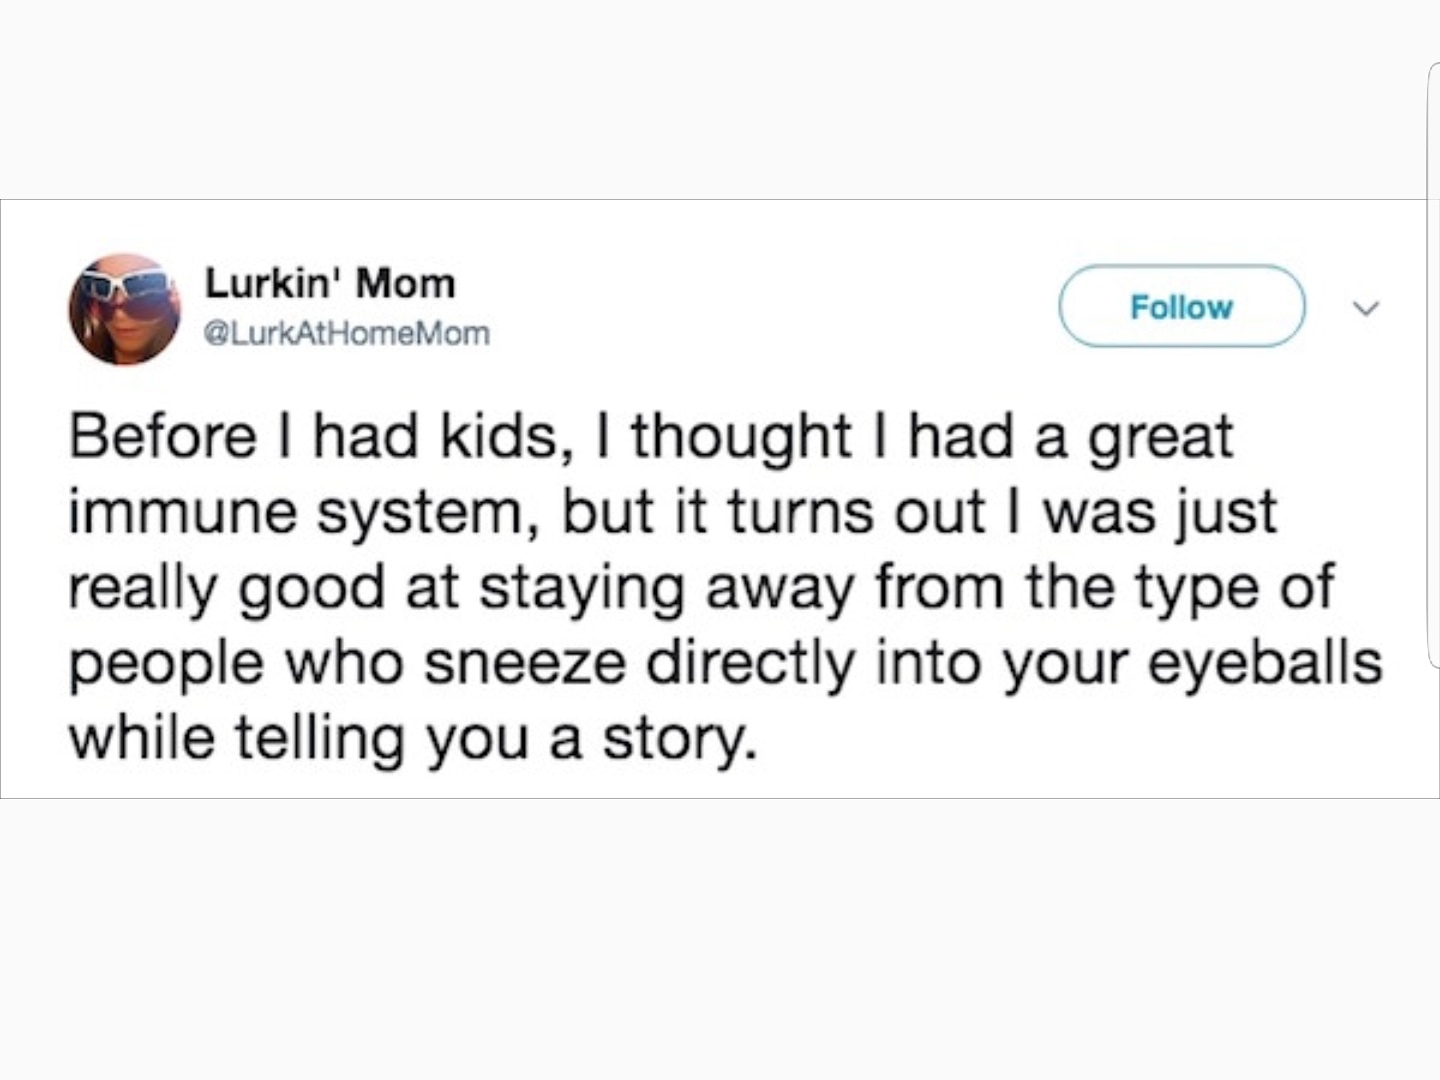 document - Lurkin' Mom Before I had kids, I thought I had a great immune system, but it turns out I was just really good at staying away from the type of people who sneeze directly into your eyeballs while telling you a story.